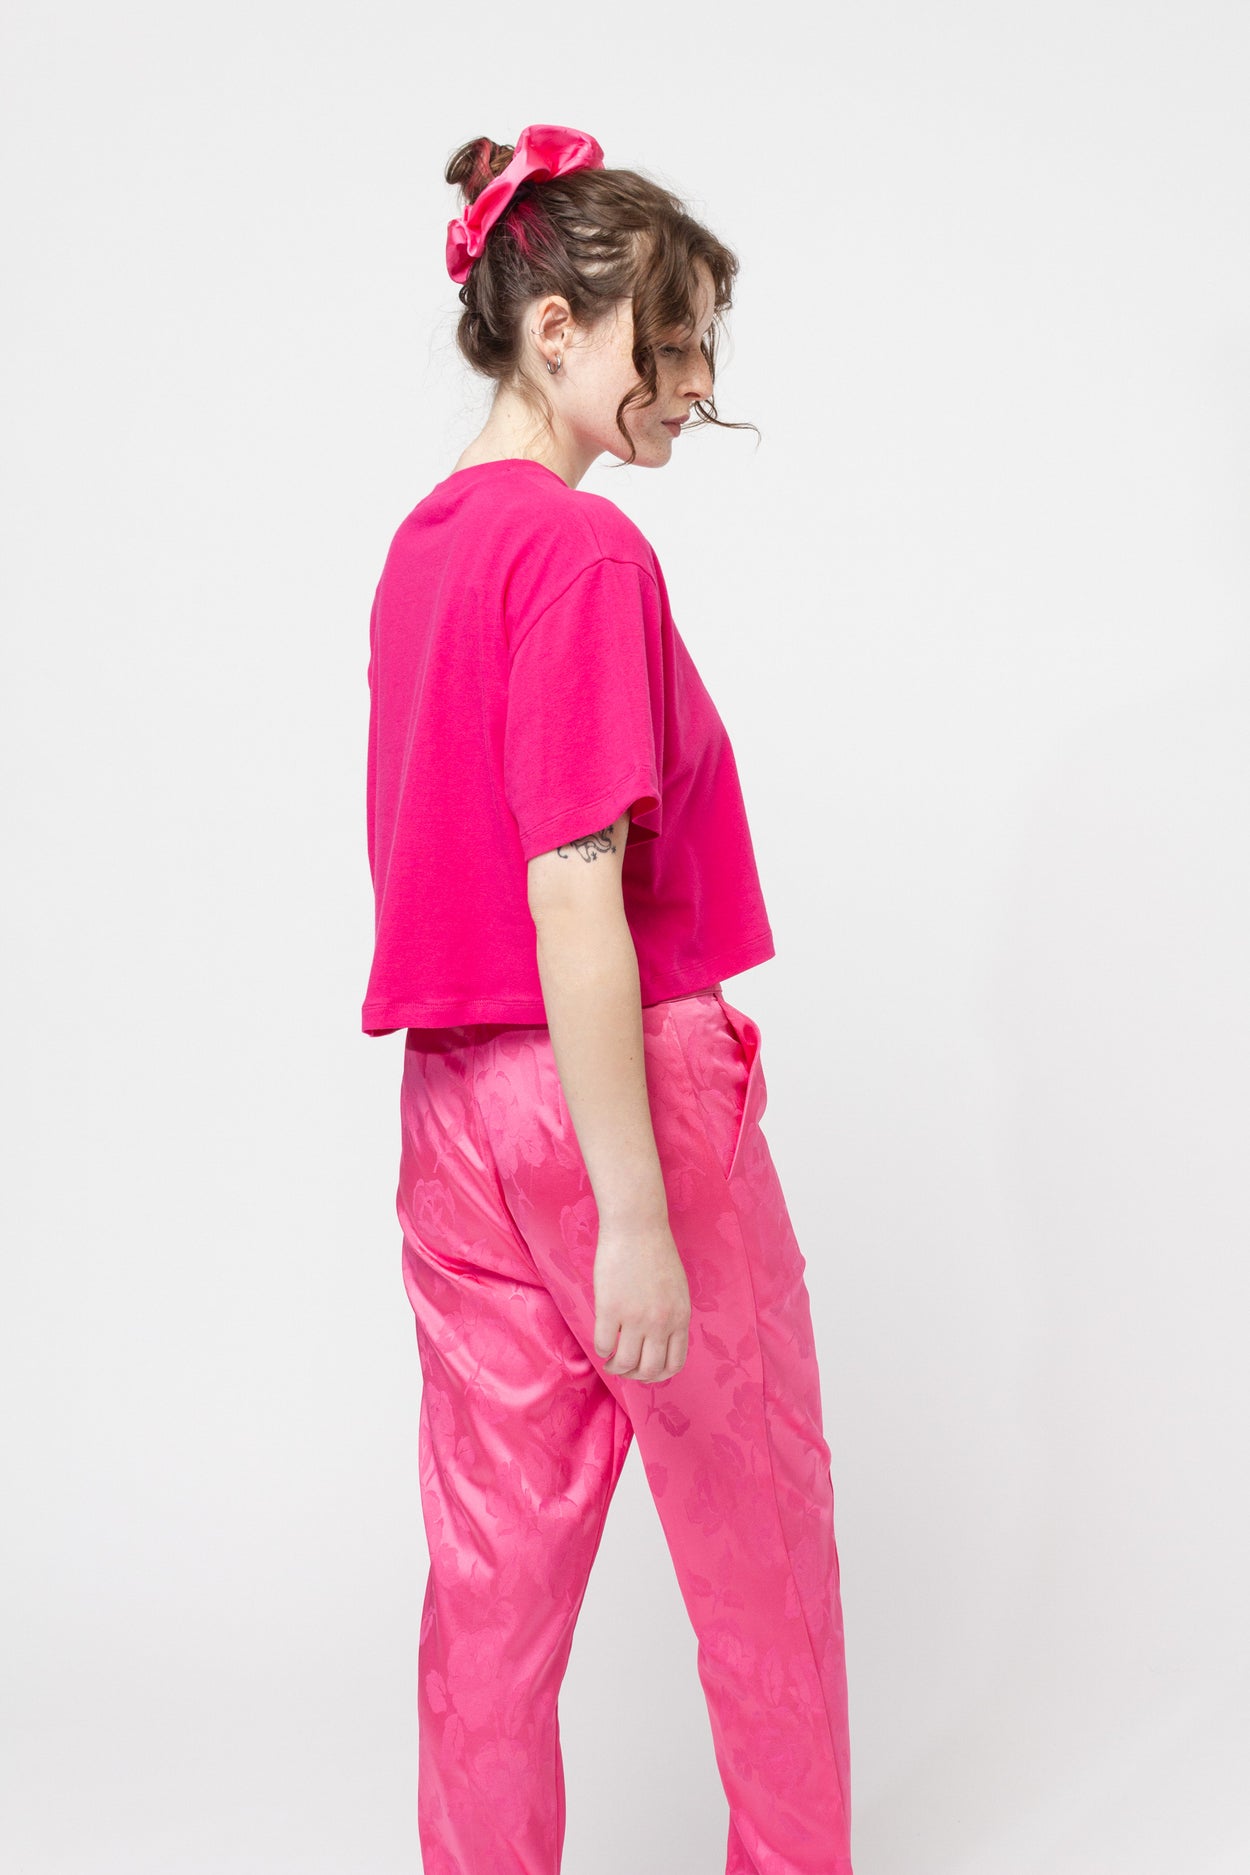 The Hot Pink Cropped T